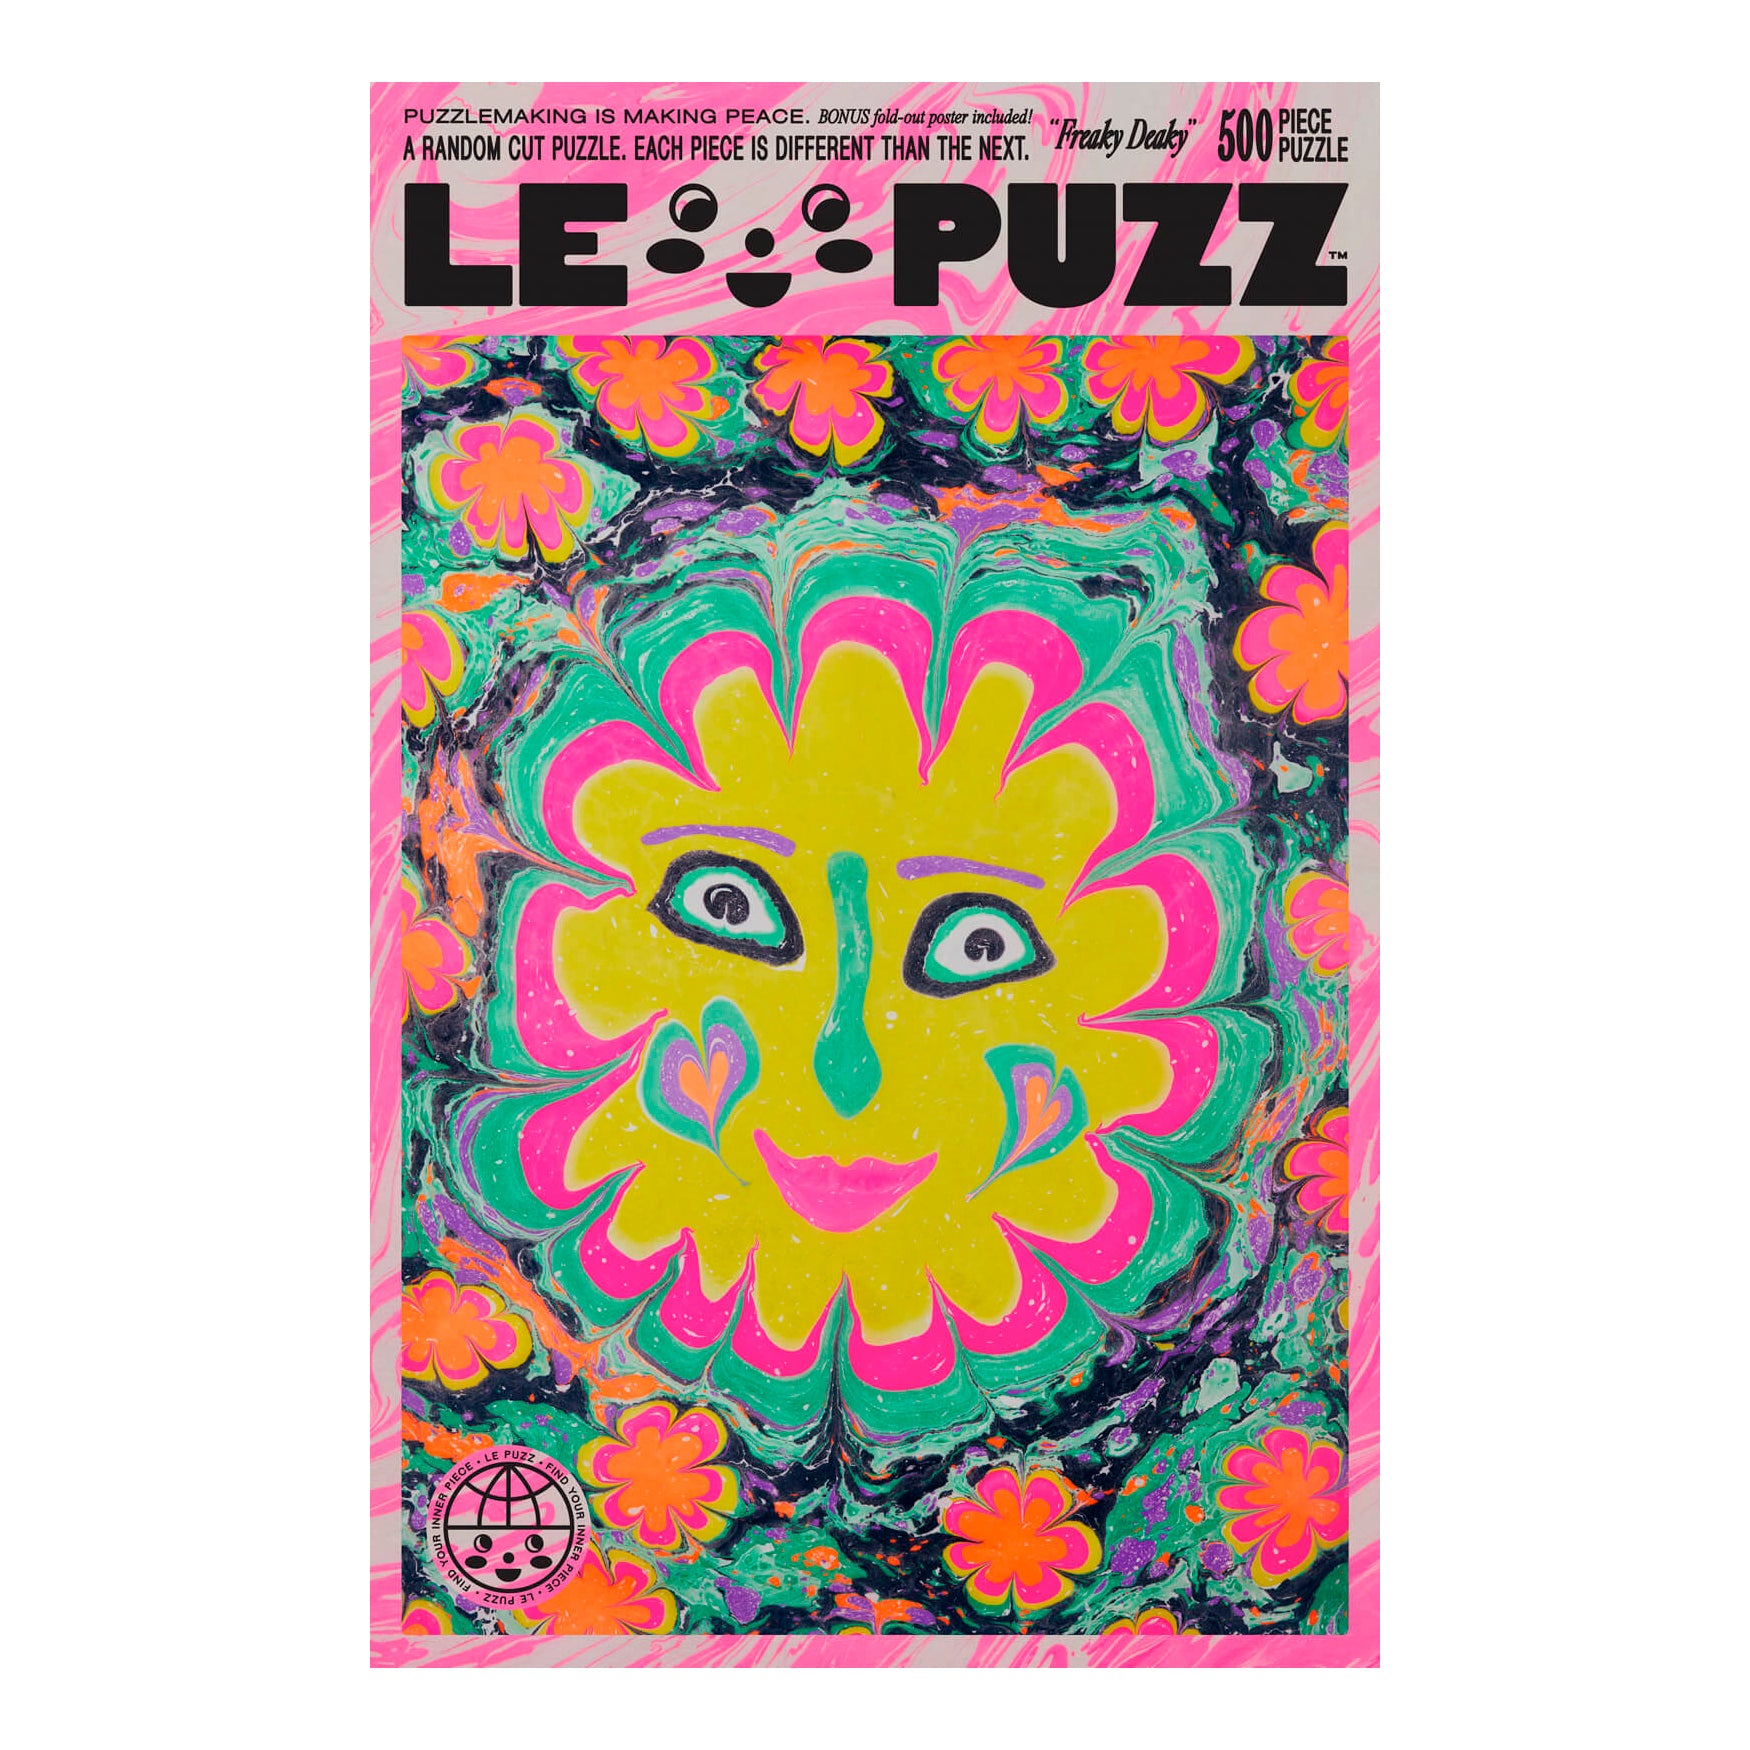 Puzzle Freaky Deaky  - Le Puzz